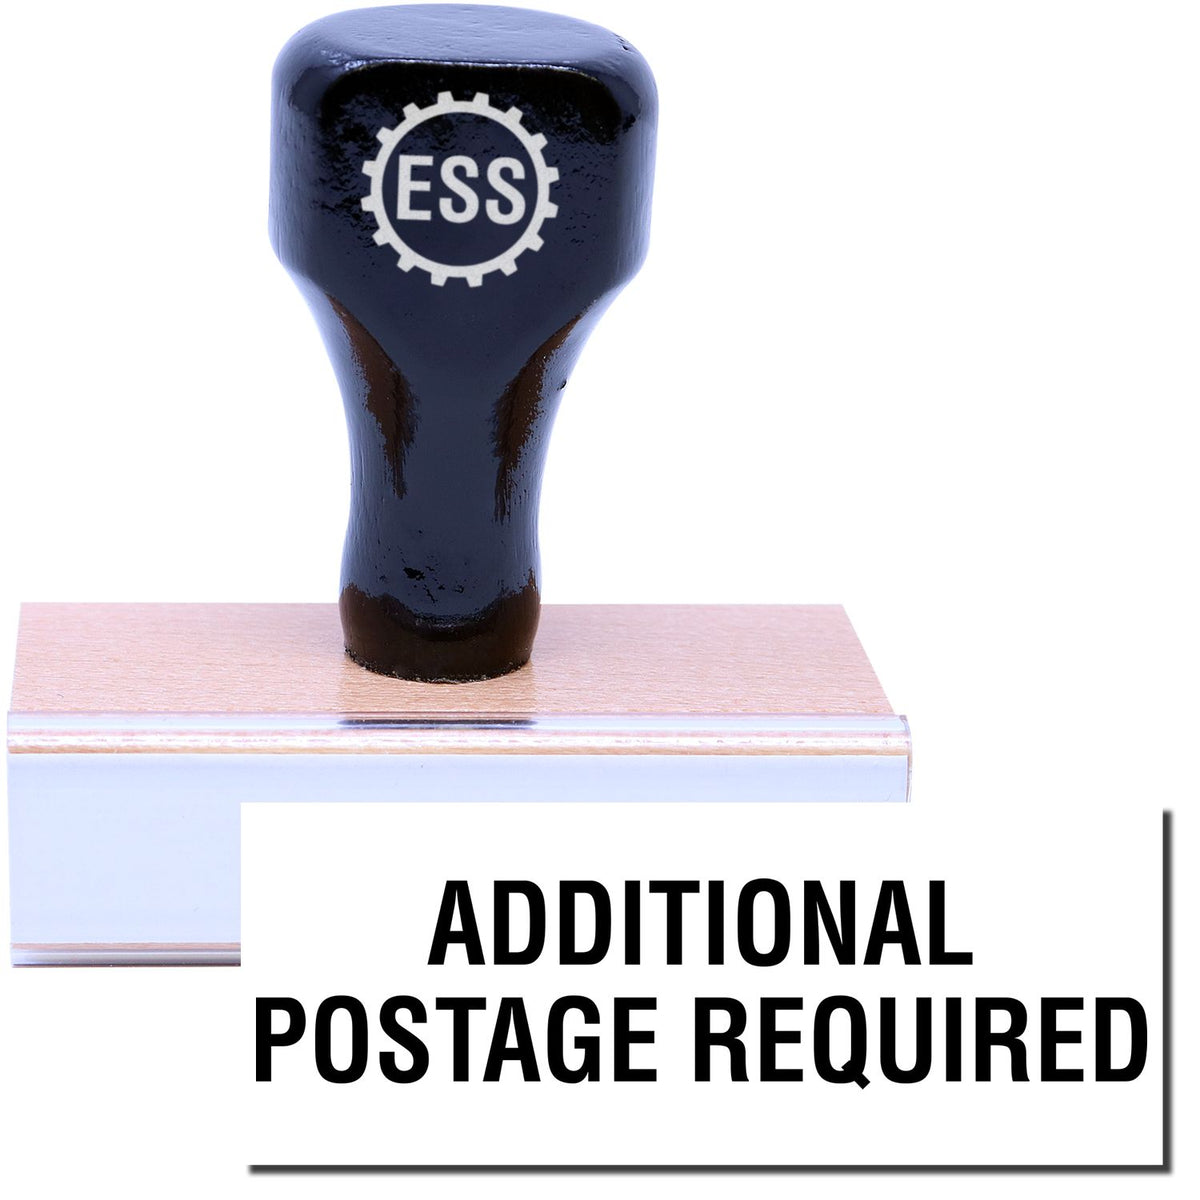 A stock office rubber stamp with a stamped image showing how the text &quot;ADDITIONAL POSTAGE REQUIRED&quot; is displayed after stamping.